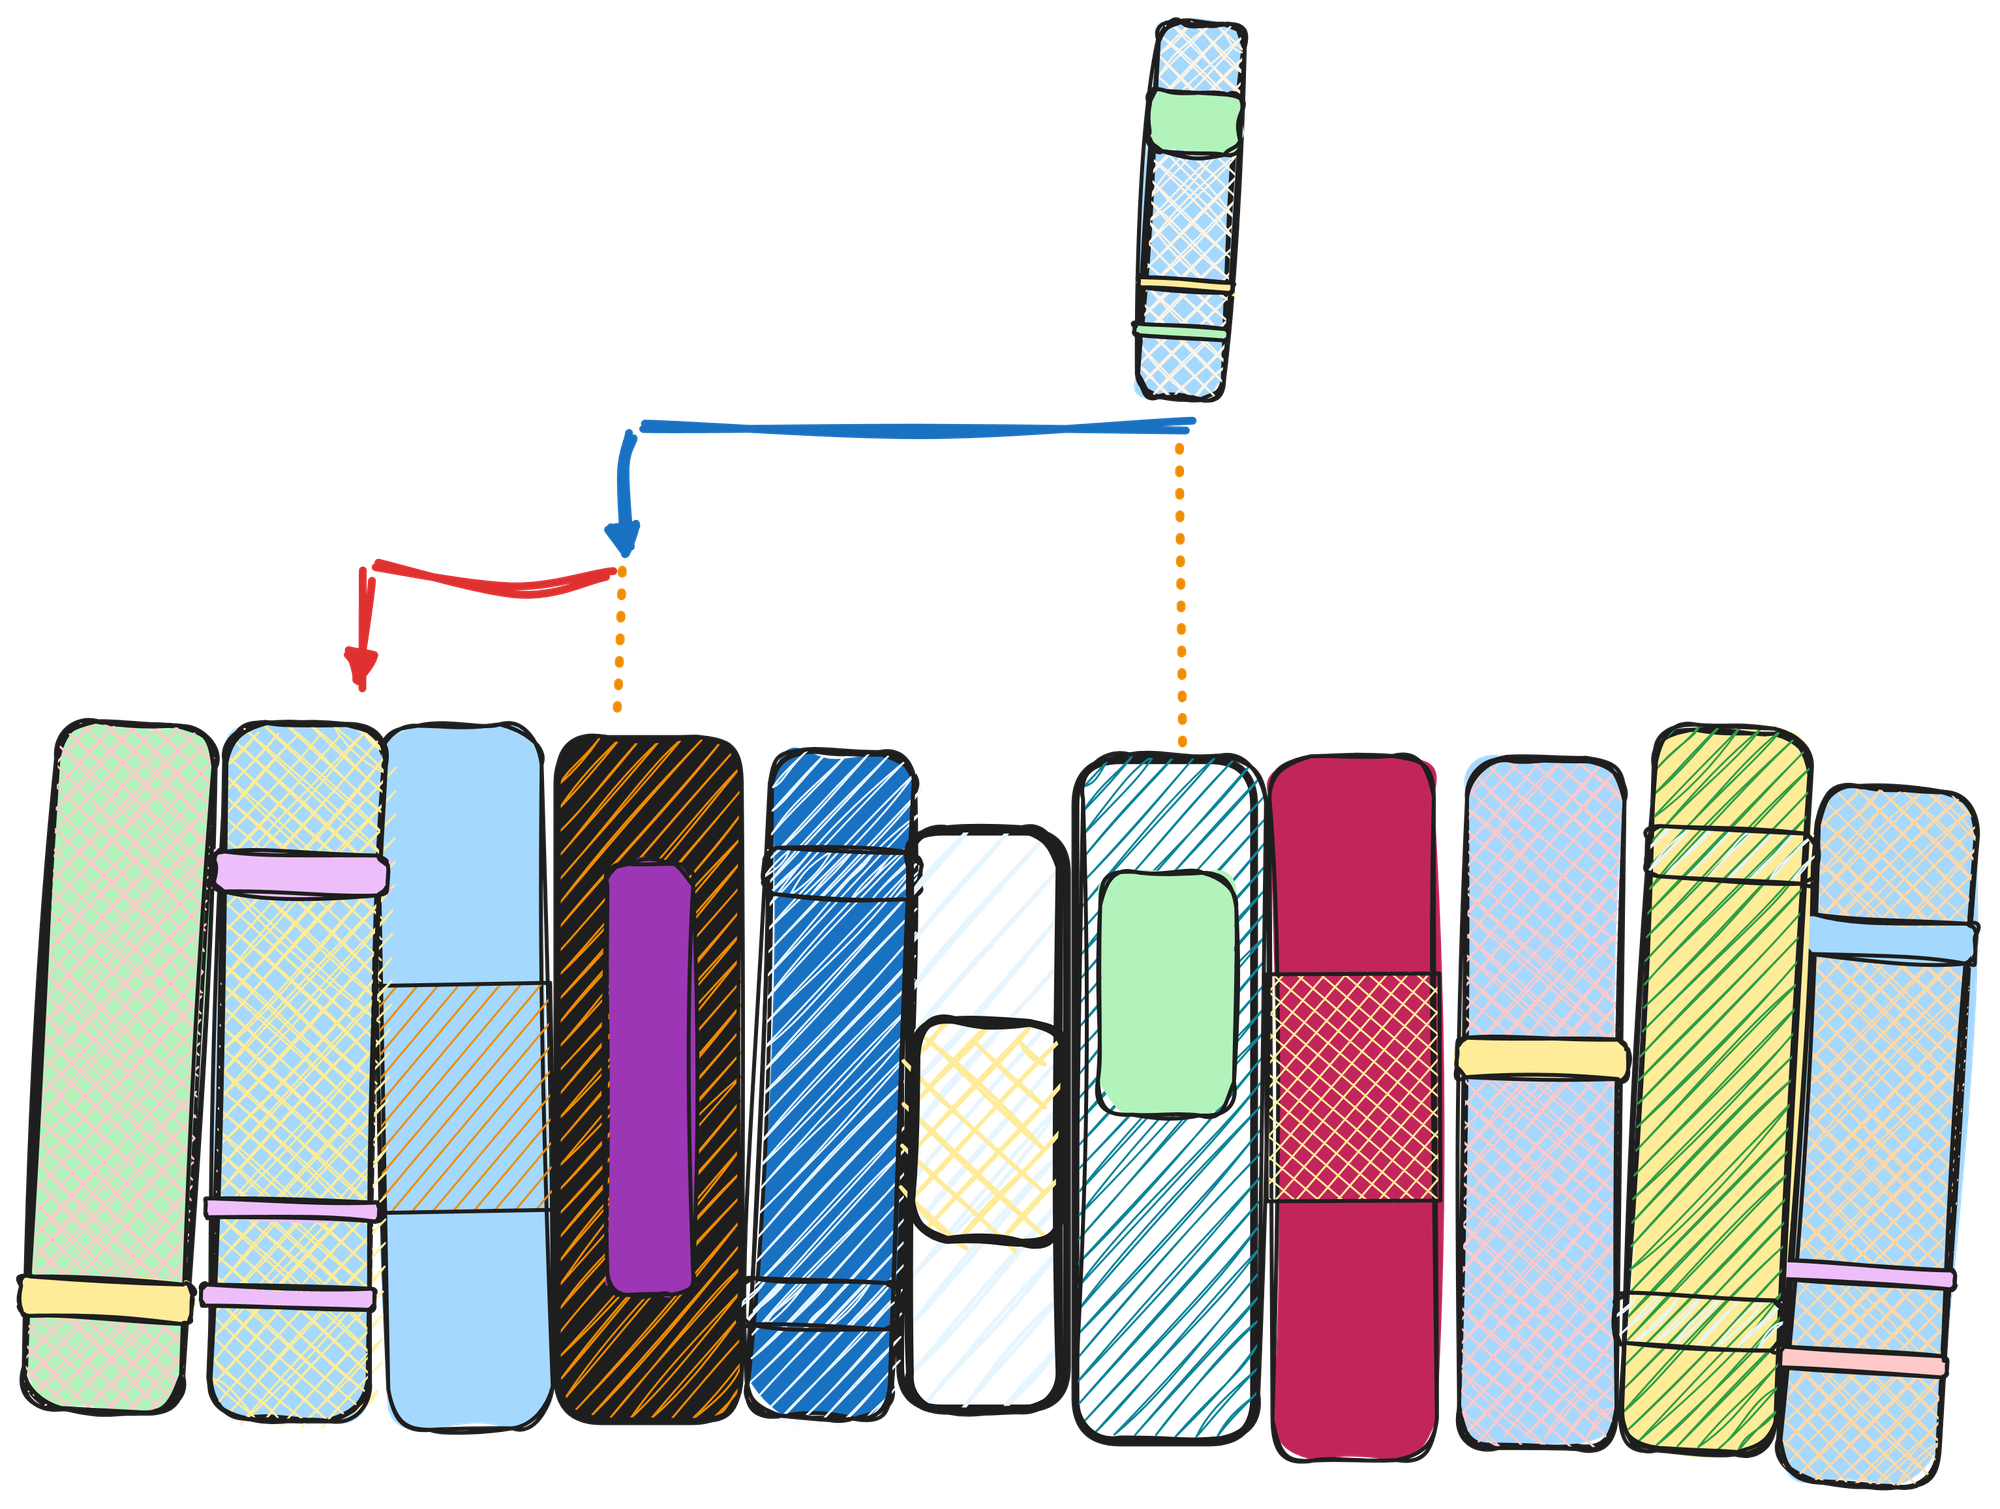 Stylized depiction of a binary search. A bookshelf made in excalidraw.